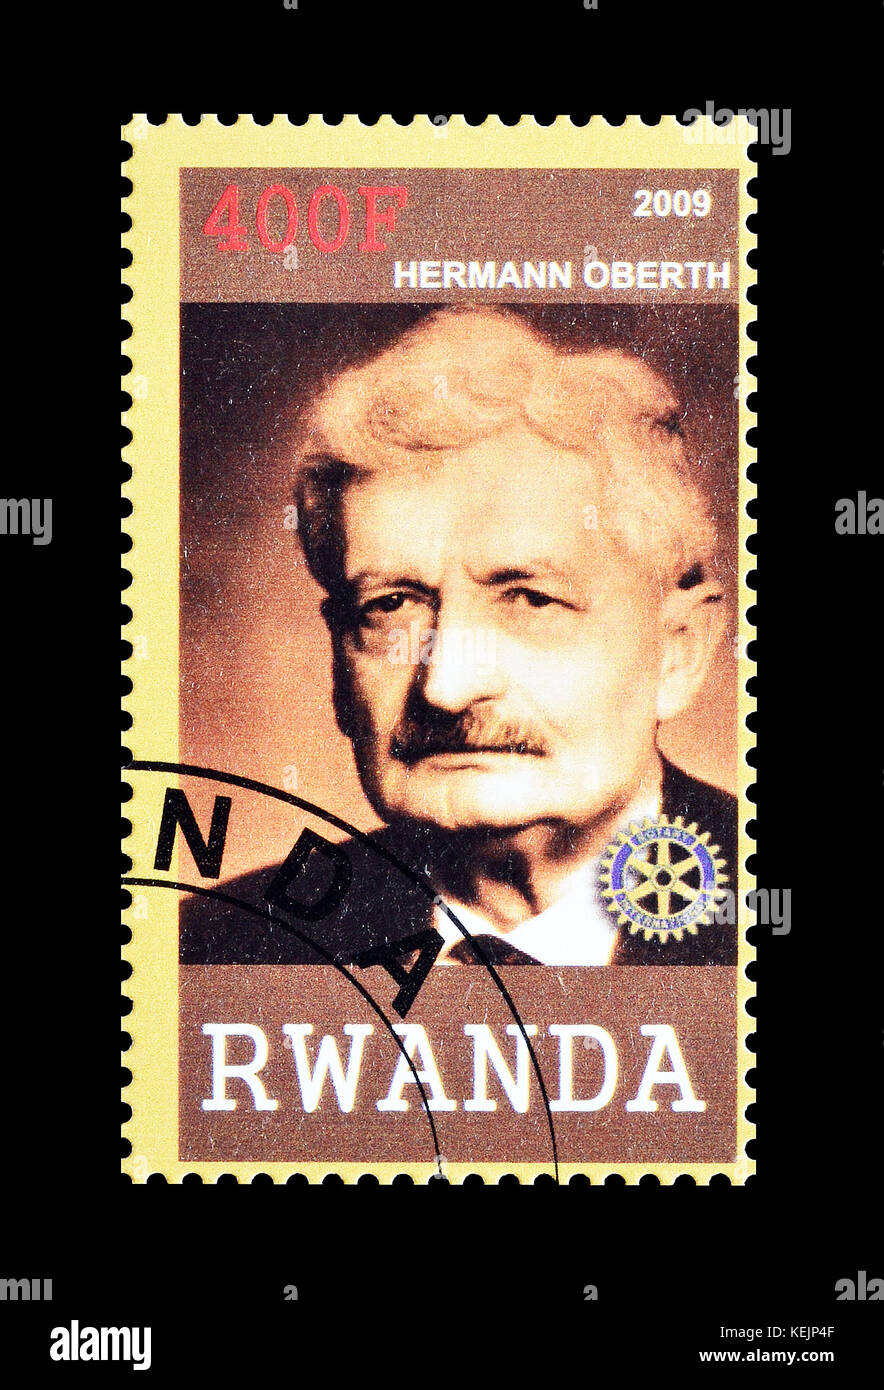 Cancelled postage stamp printed by Rwanda, that shows Hermann Oberth. Stock Photo